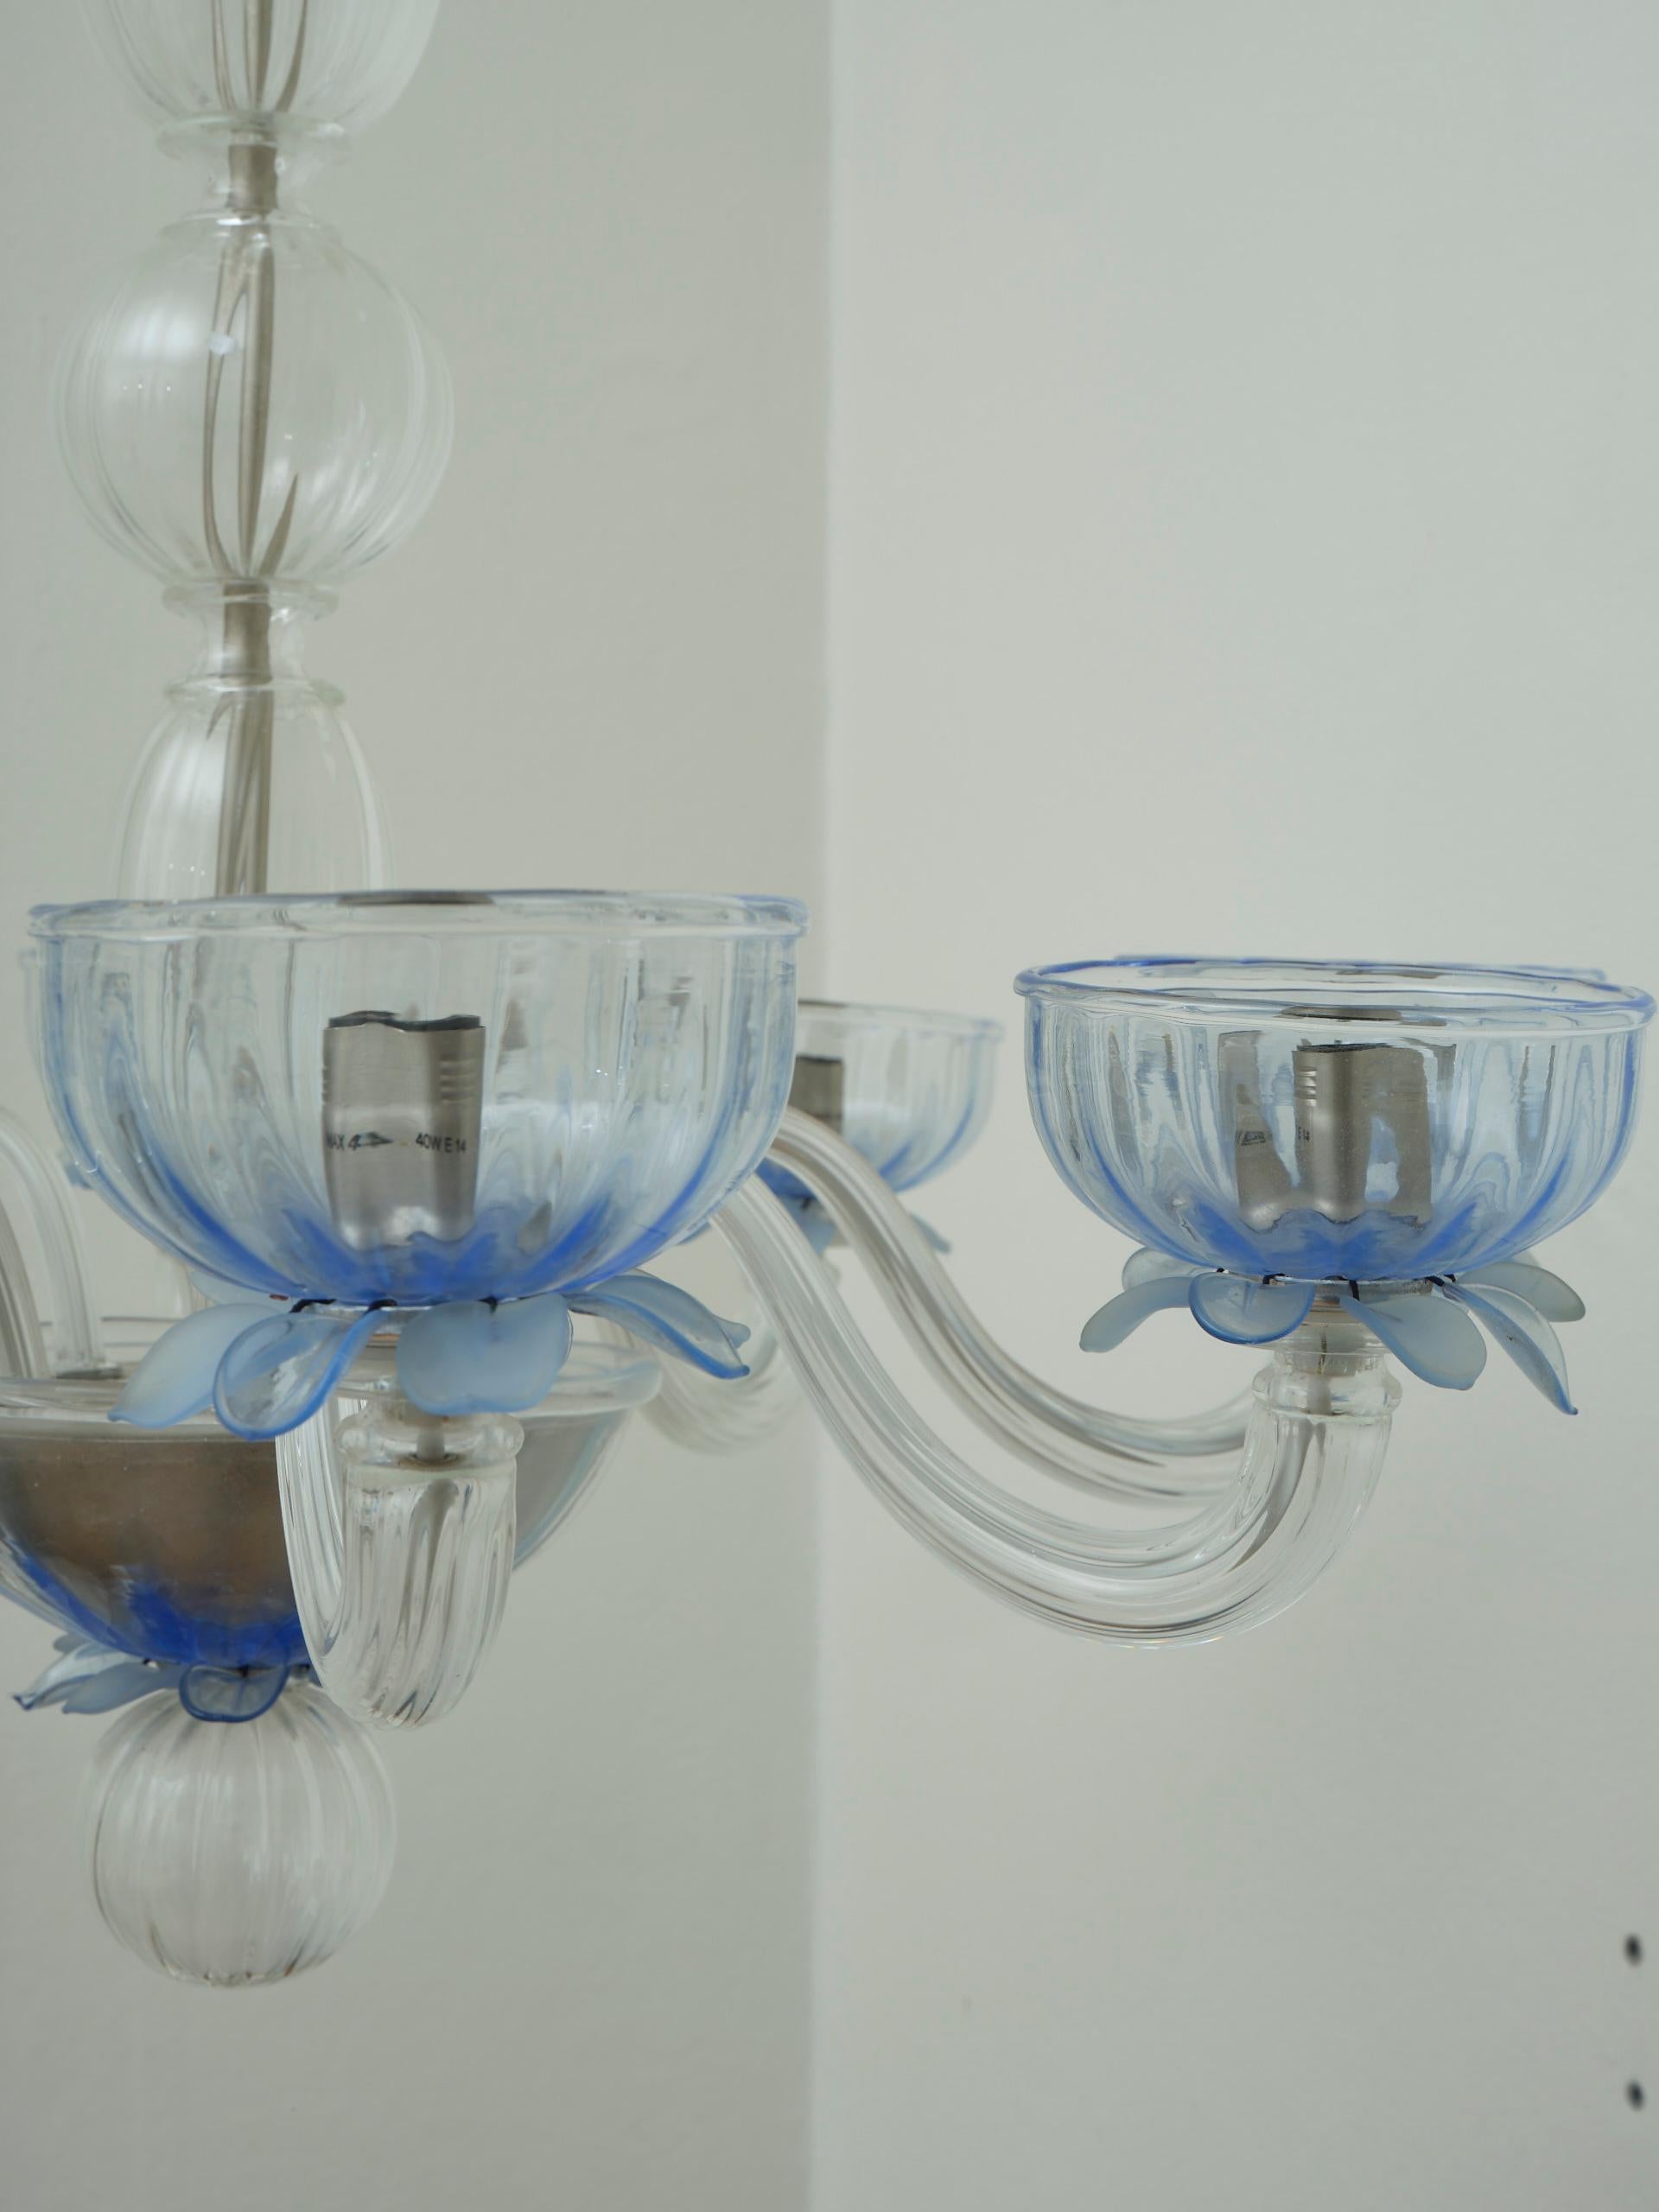 Giant European glass chandelier 8 arms blue details in the style of Murano For Sale 4